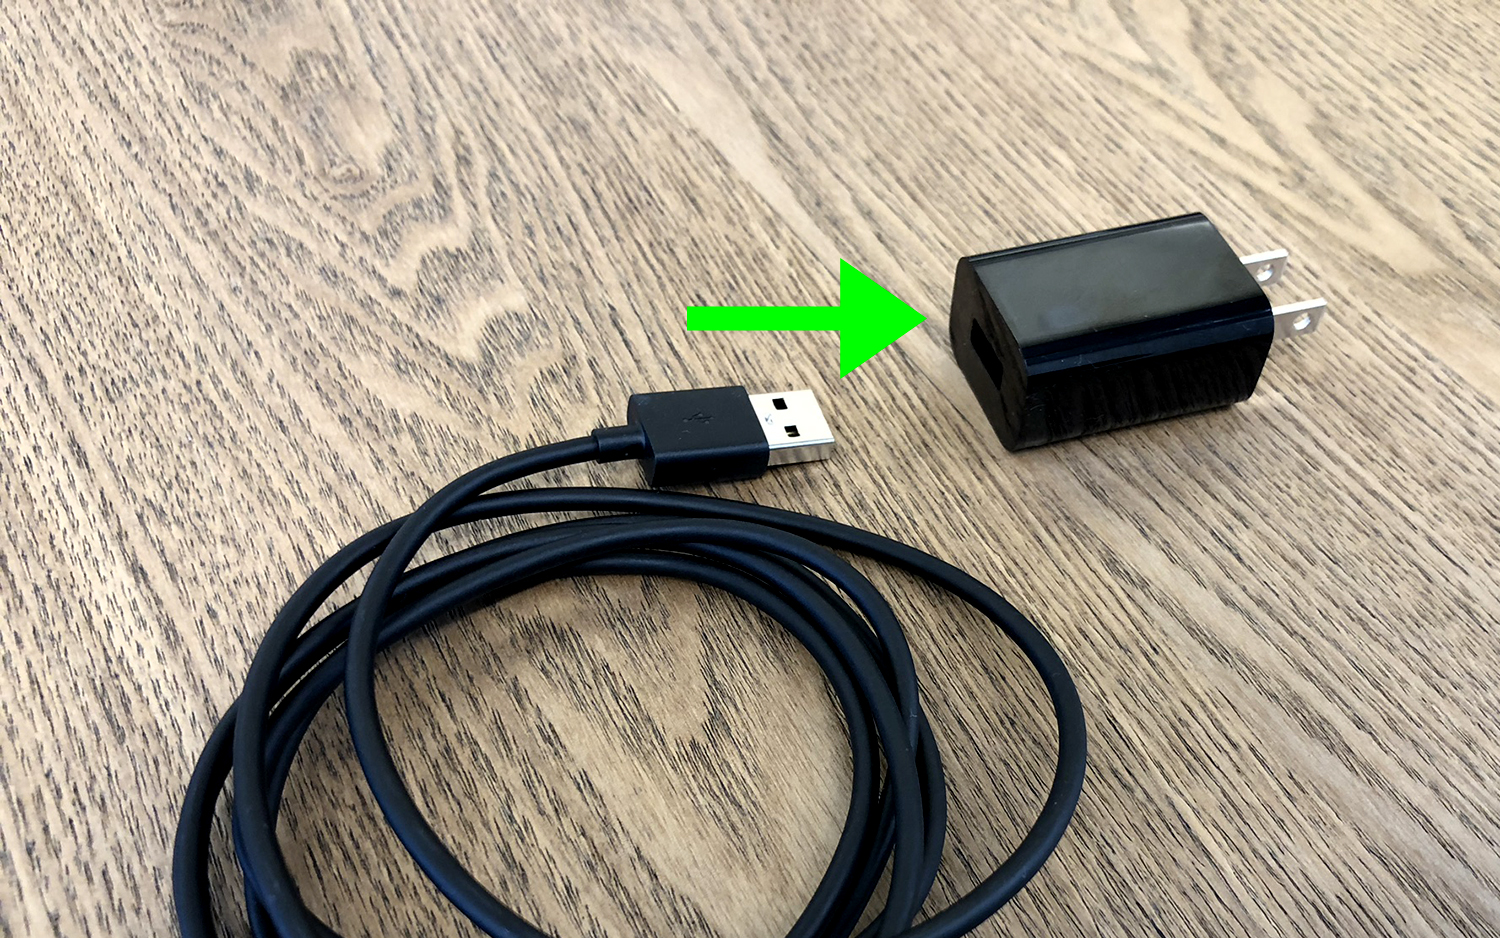 The Fire TV Stick power adapter with a USB cable positioned to be plugging into it